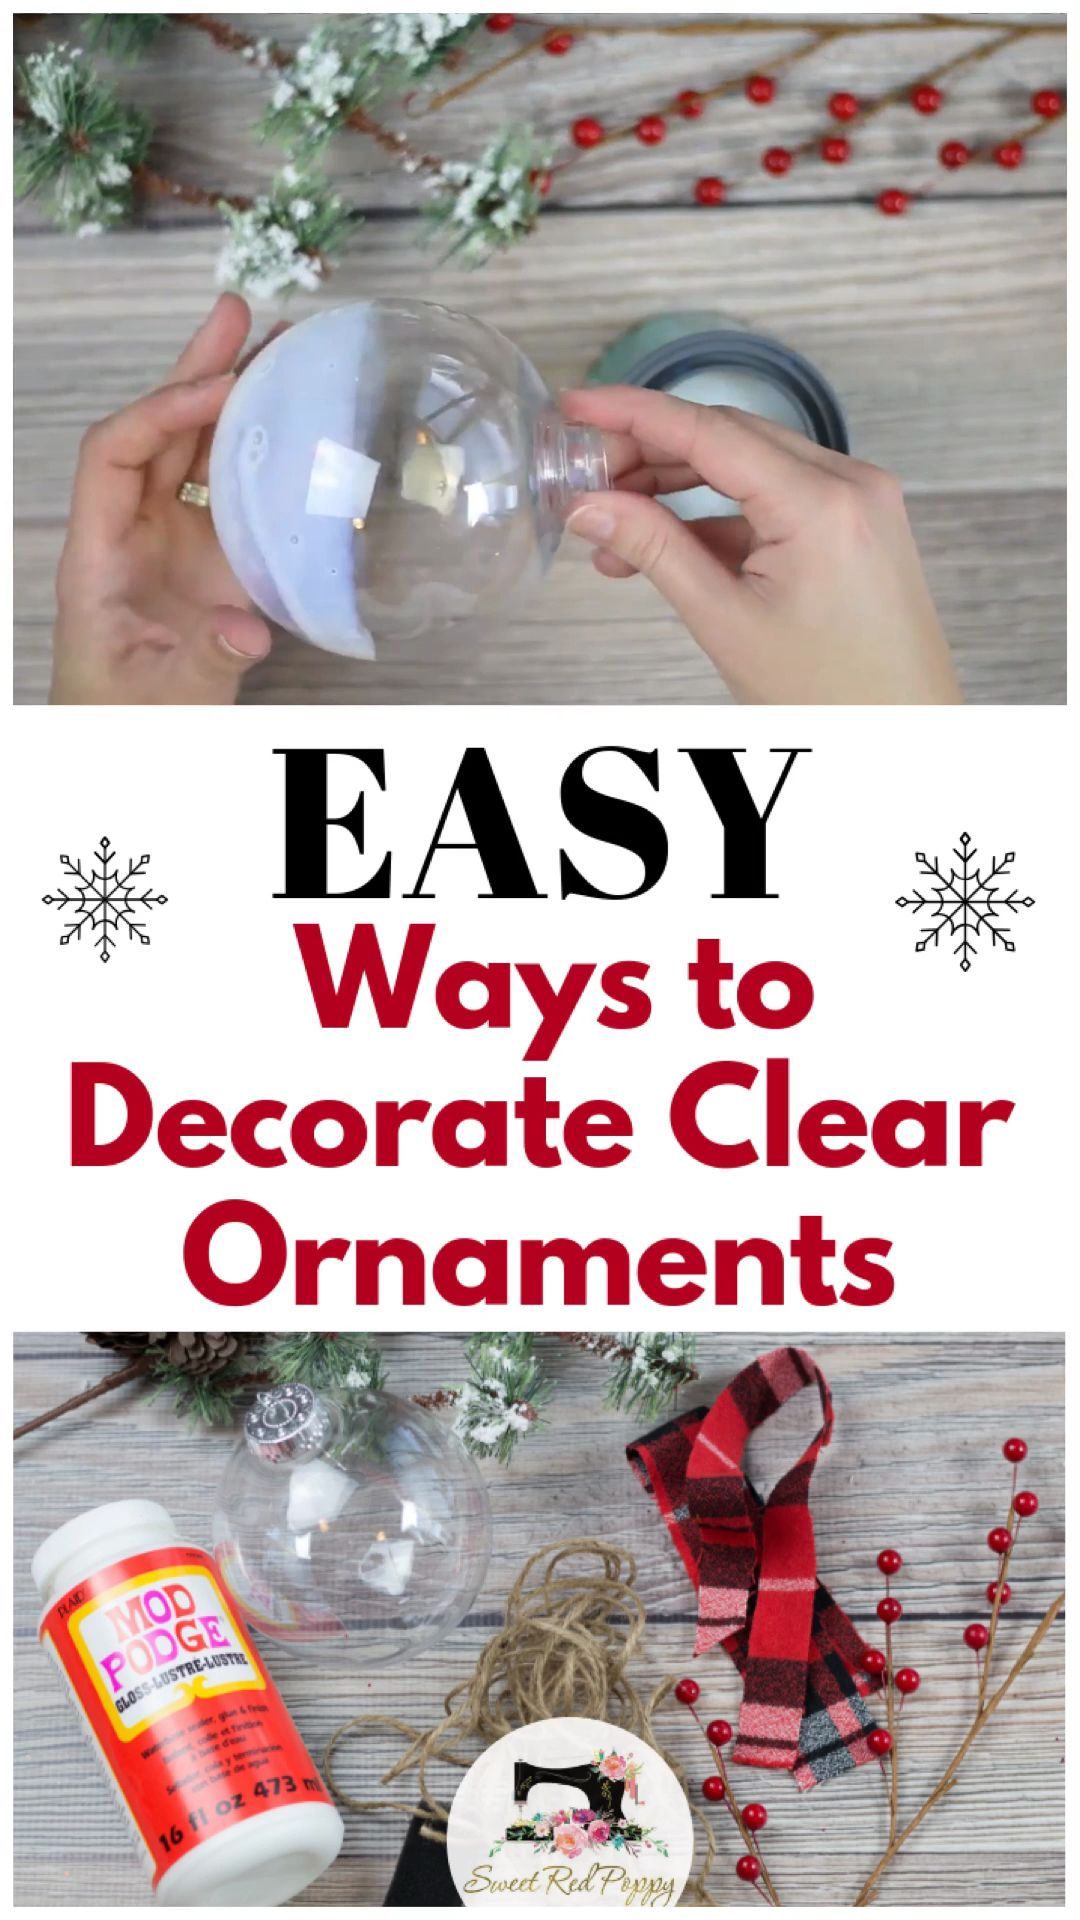 Easy Ways to Decorate Clear Plastic Ornaments for Christmas - Sweet Red Poppy - Easy Ways to Decorate Clear Plastic Ornaments for Christmas - Sweet Red Poppy -   diy Christmas Decorations for outside